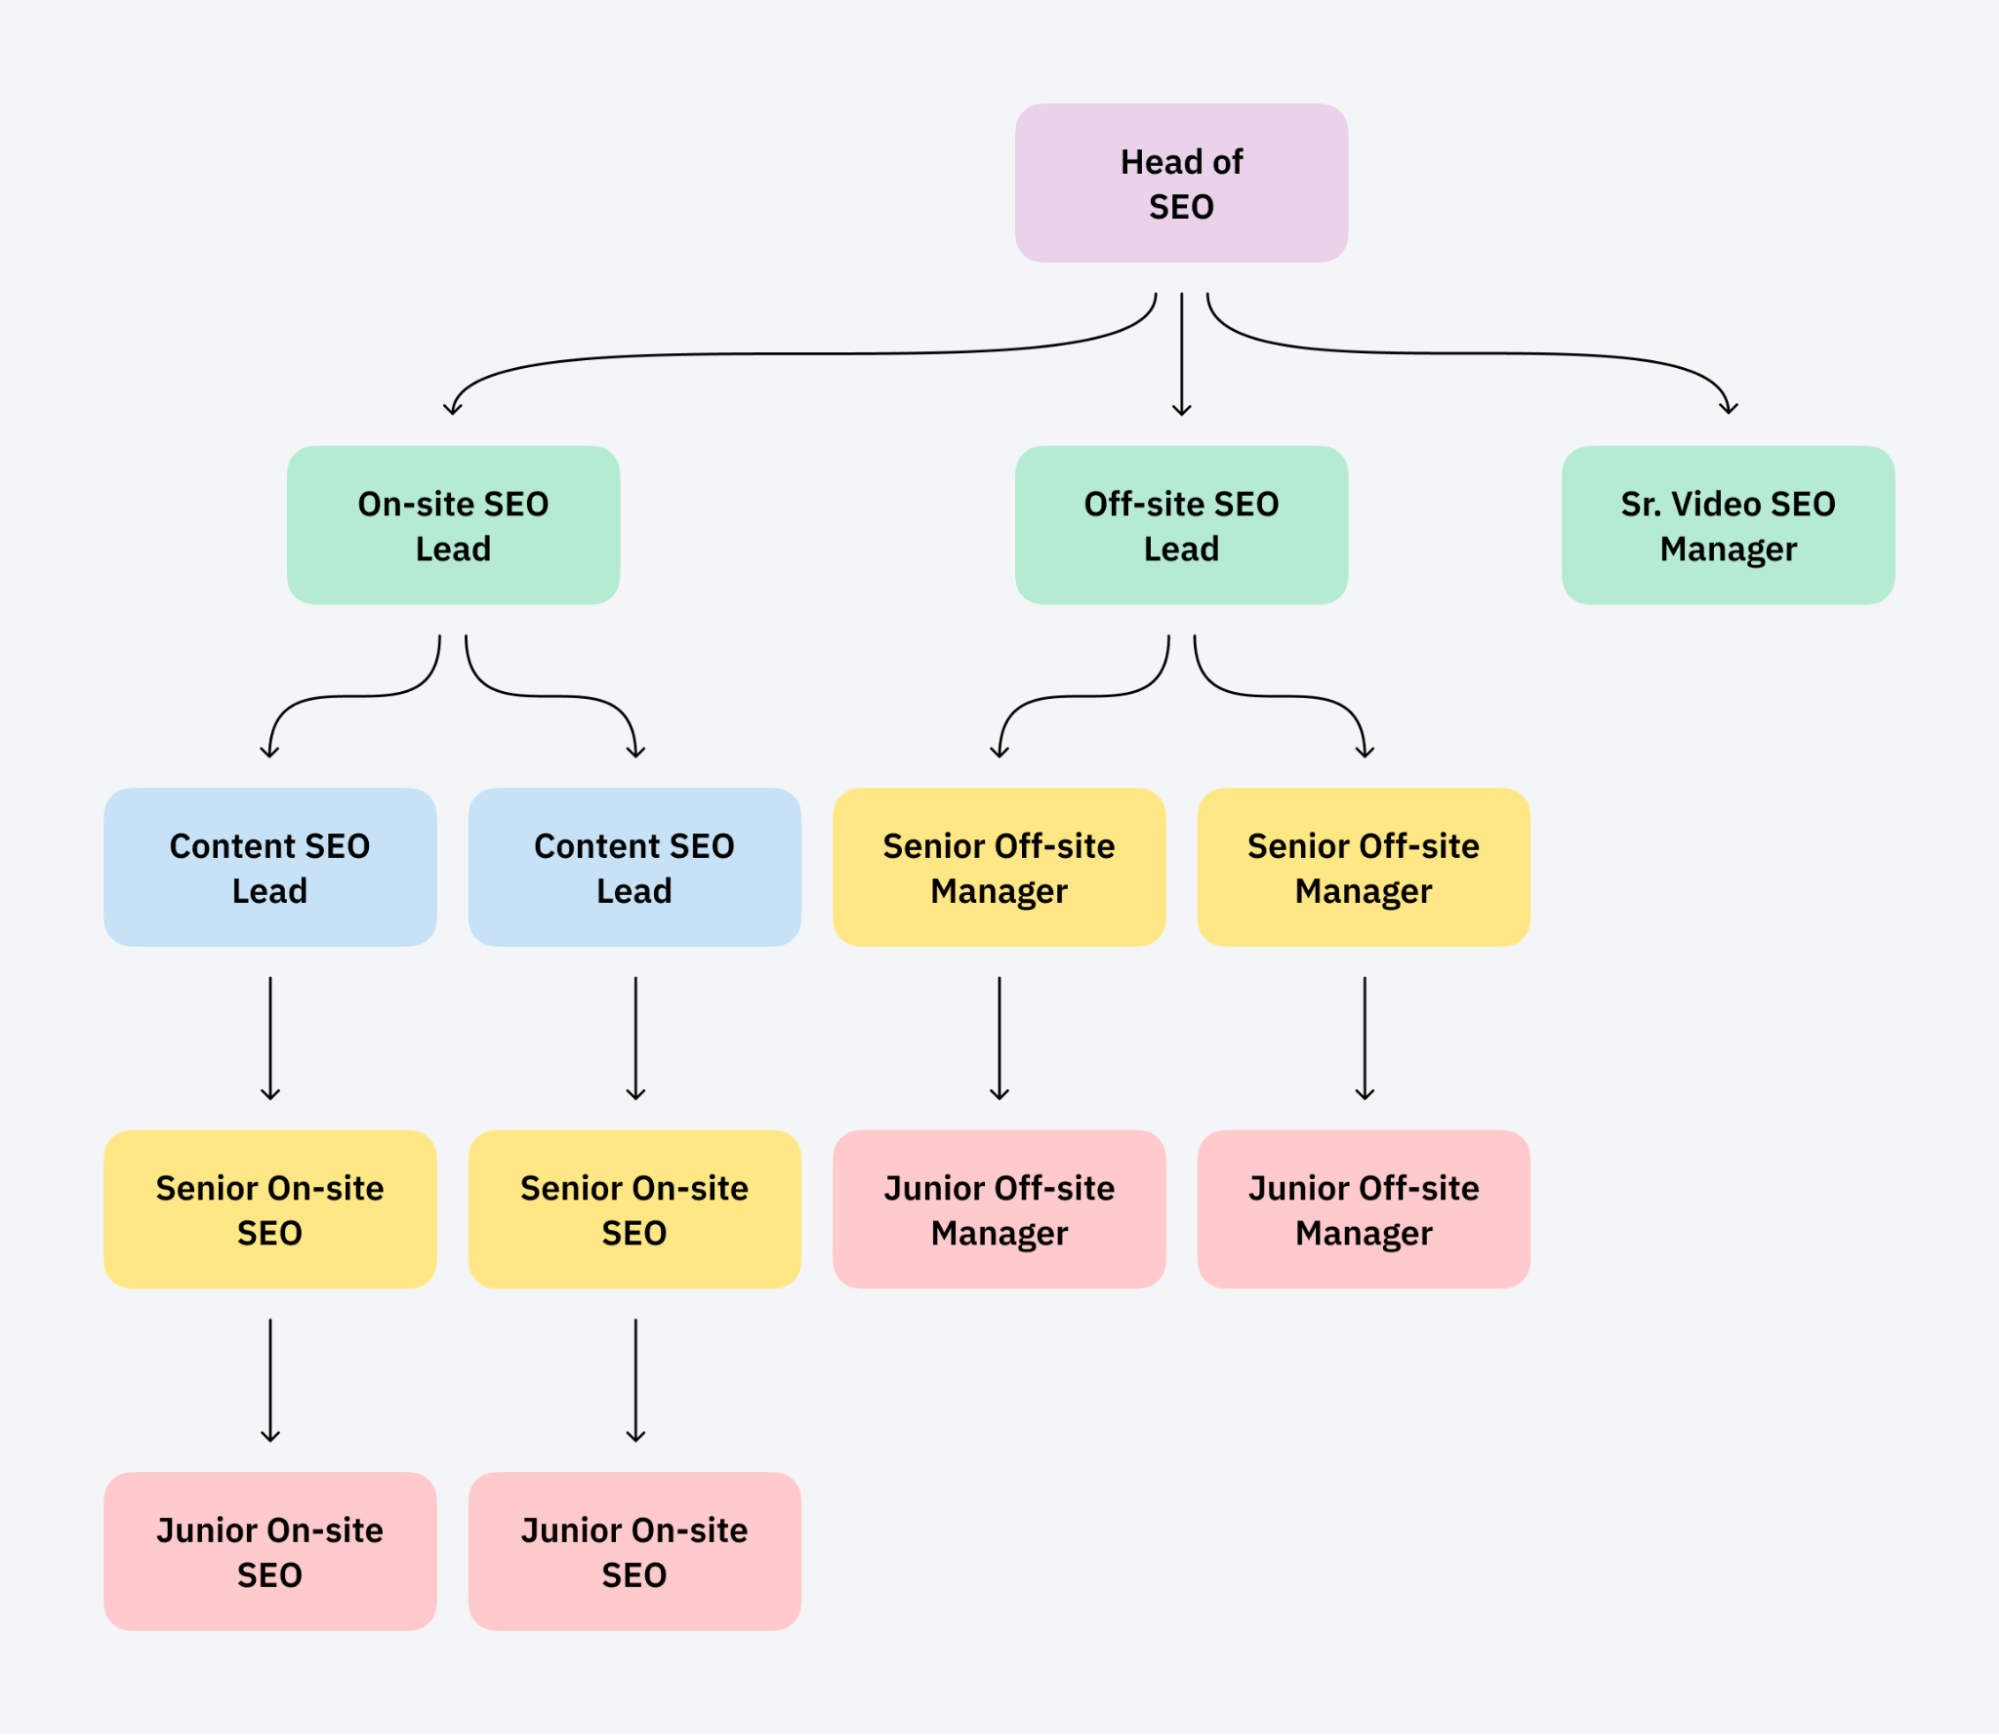 Nord VPN large in-house SEO team structure example 